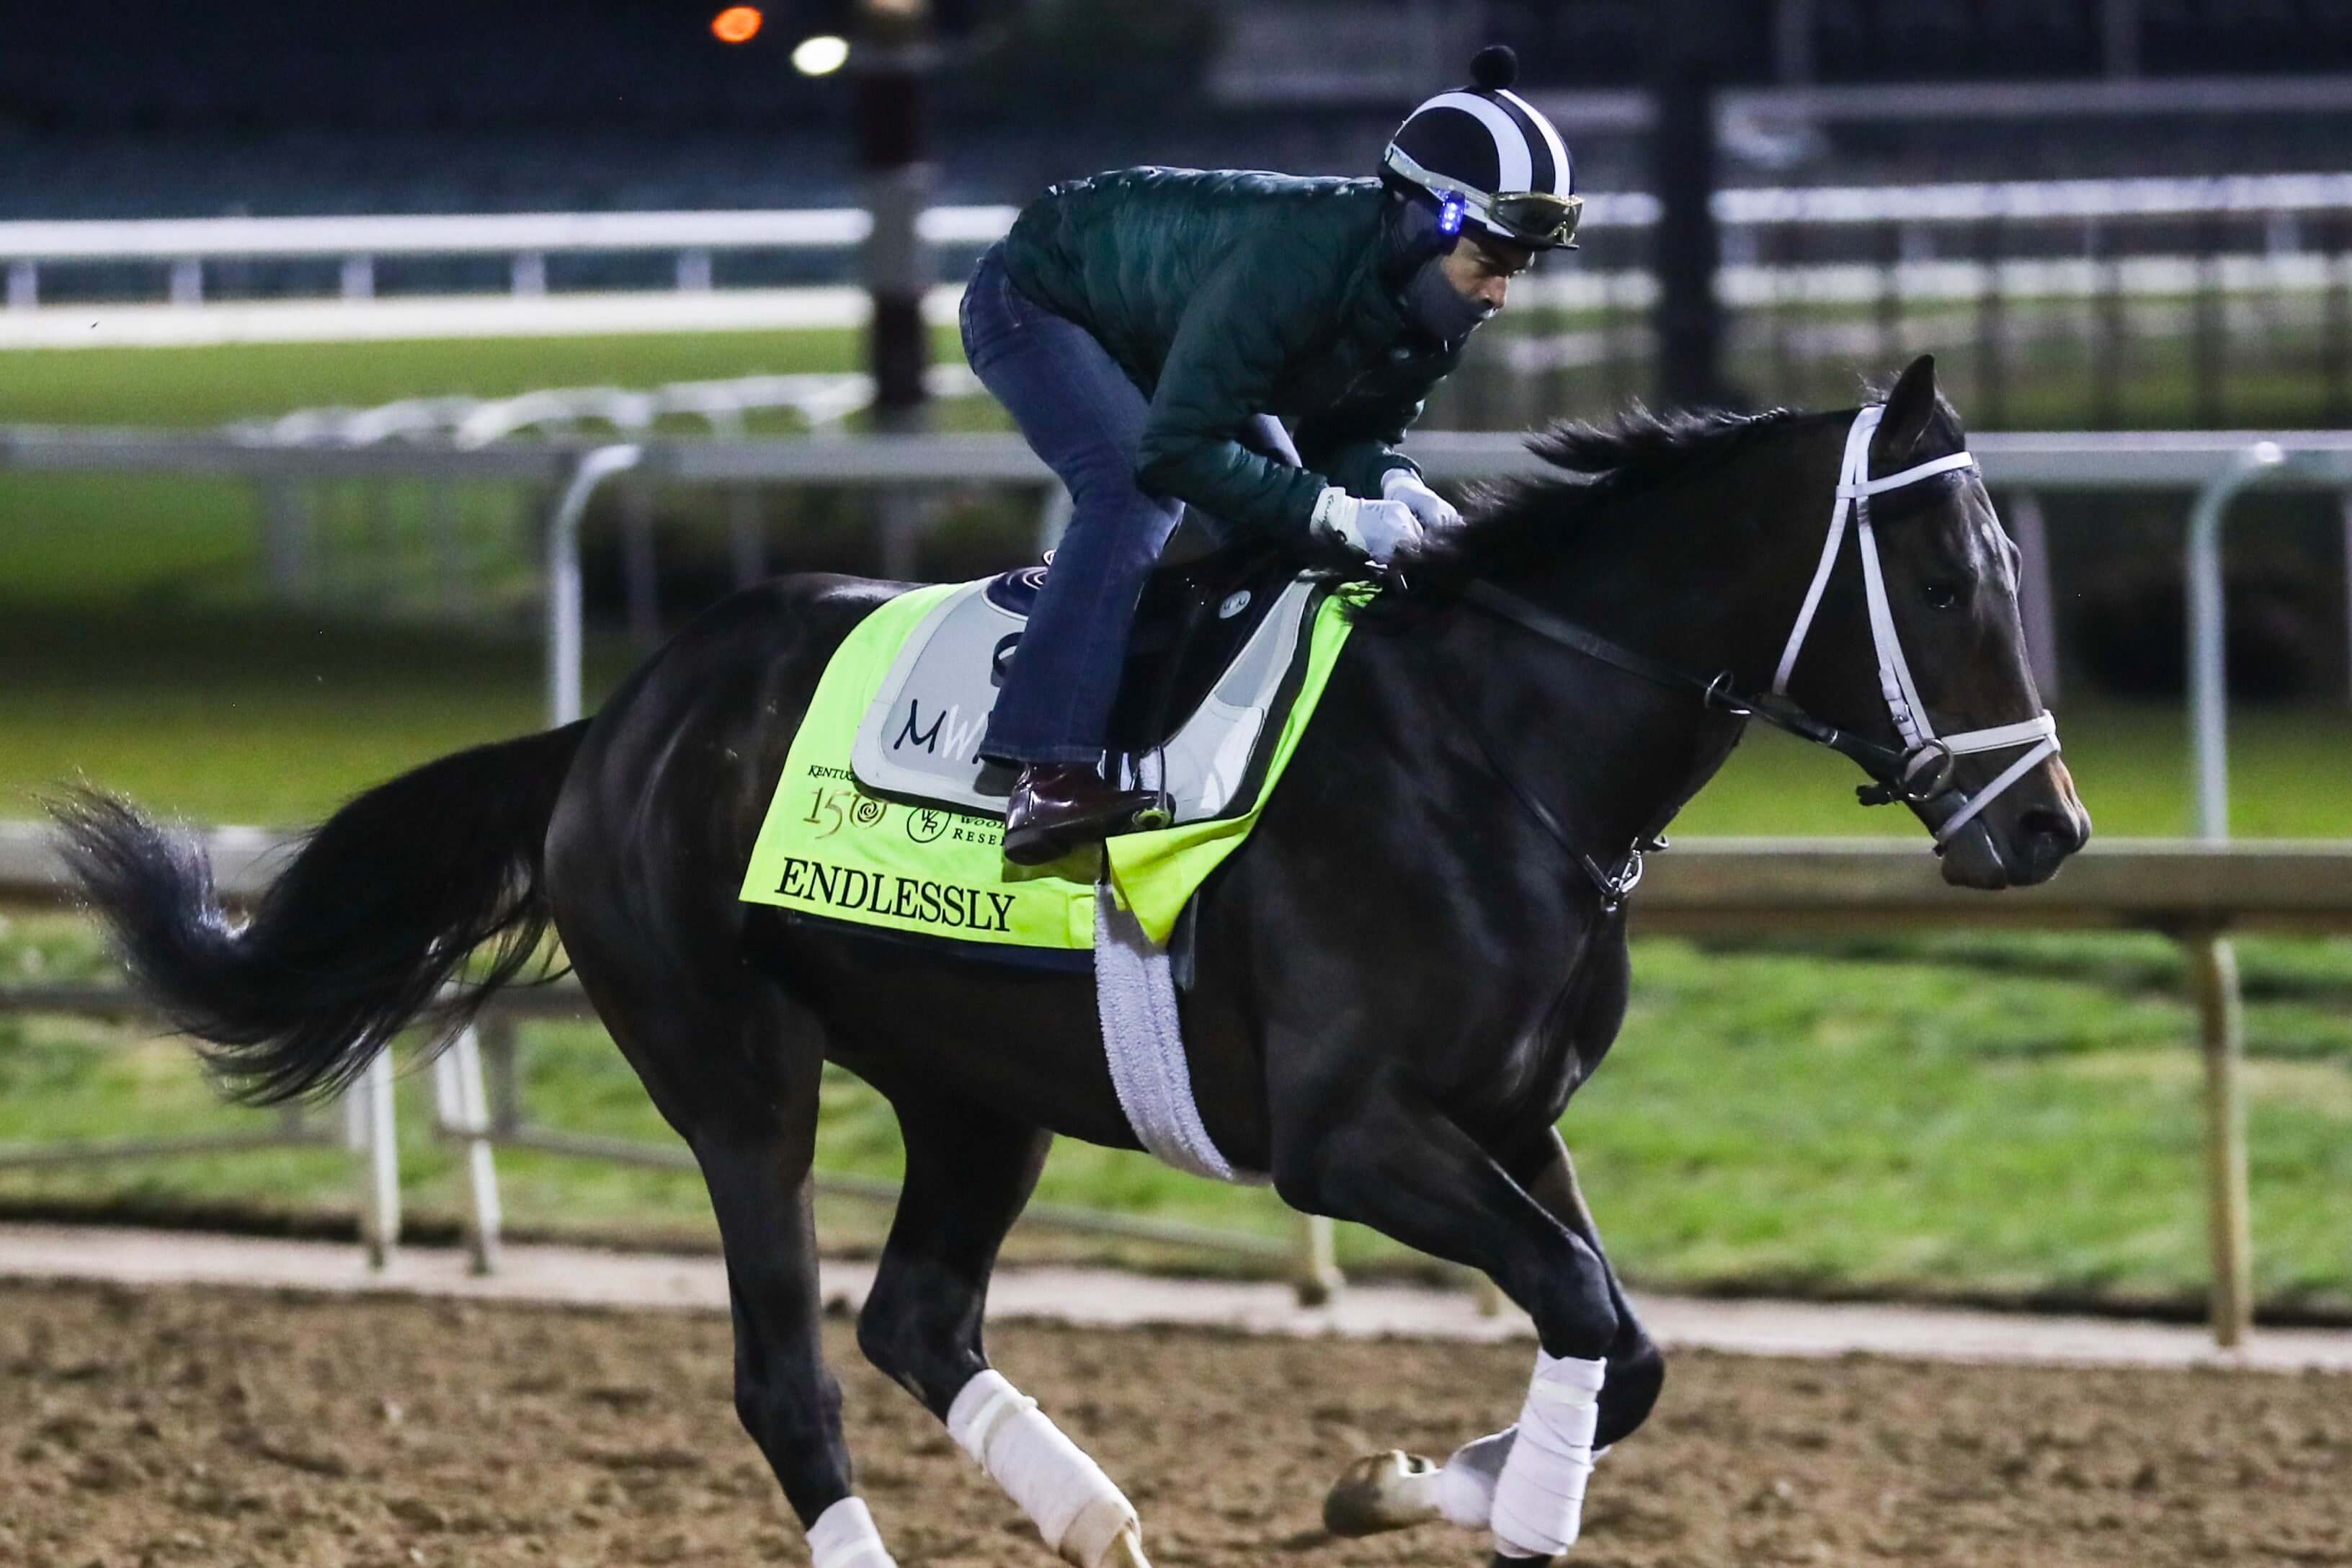 How To Bet - Road to the Breeders' Cup Picks & Best Bets for 7-6: Belmont Derby & Belmont Oaks